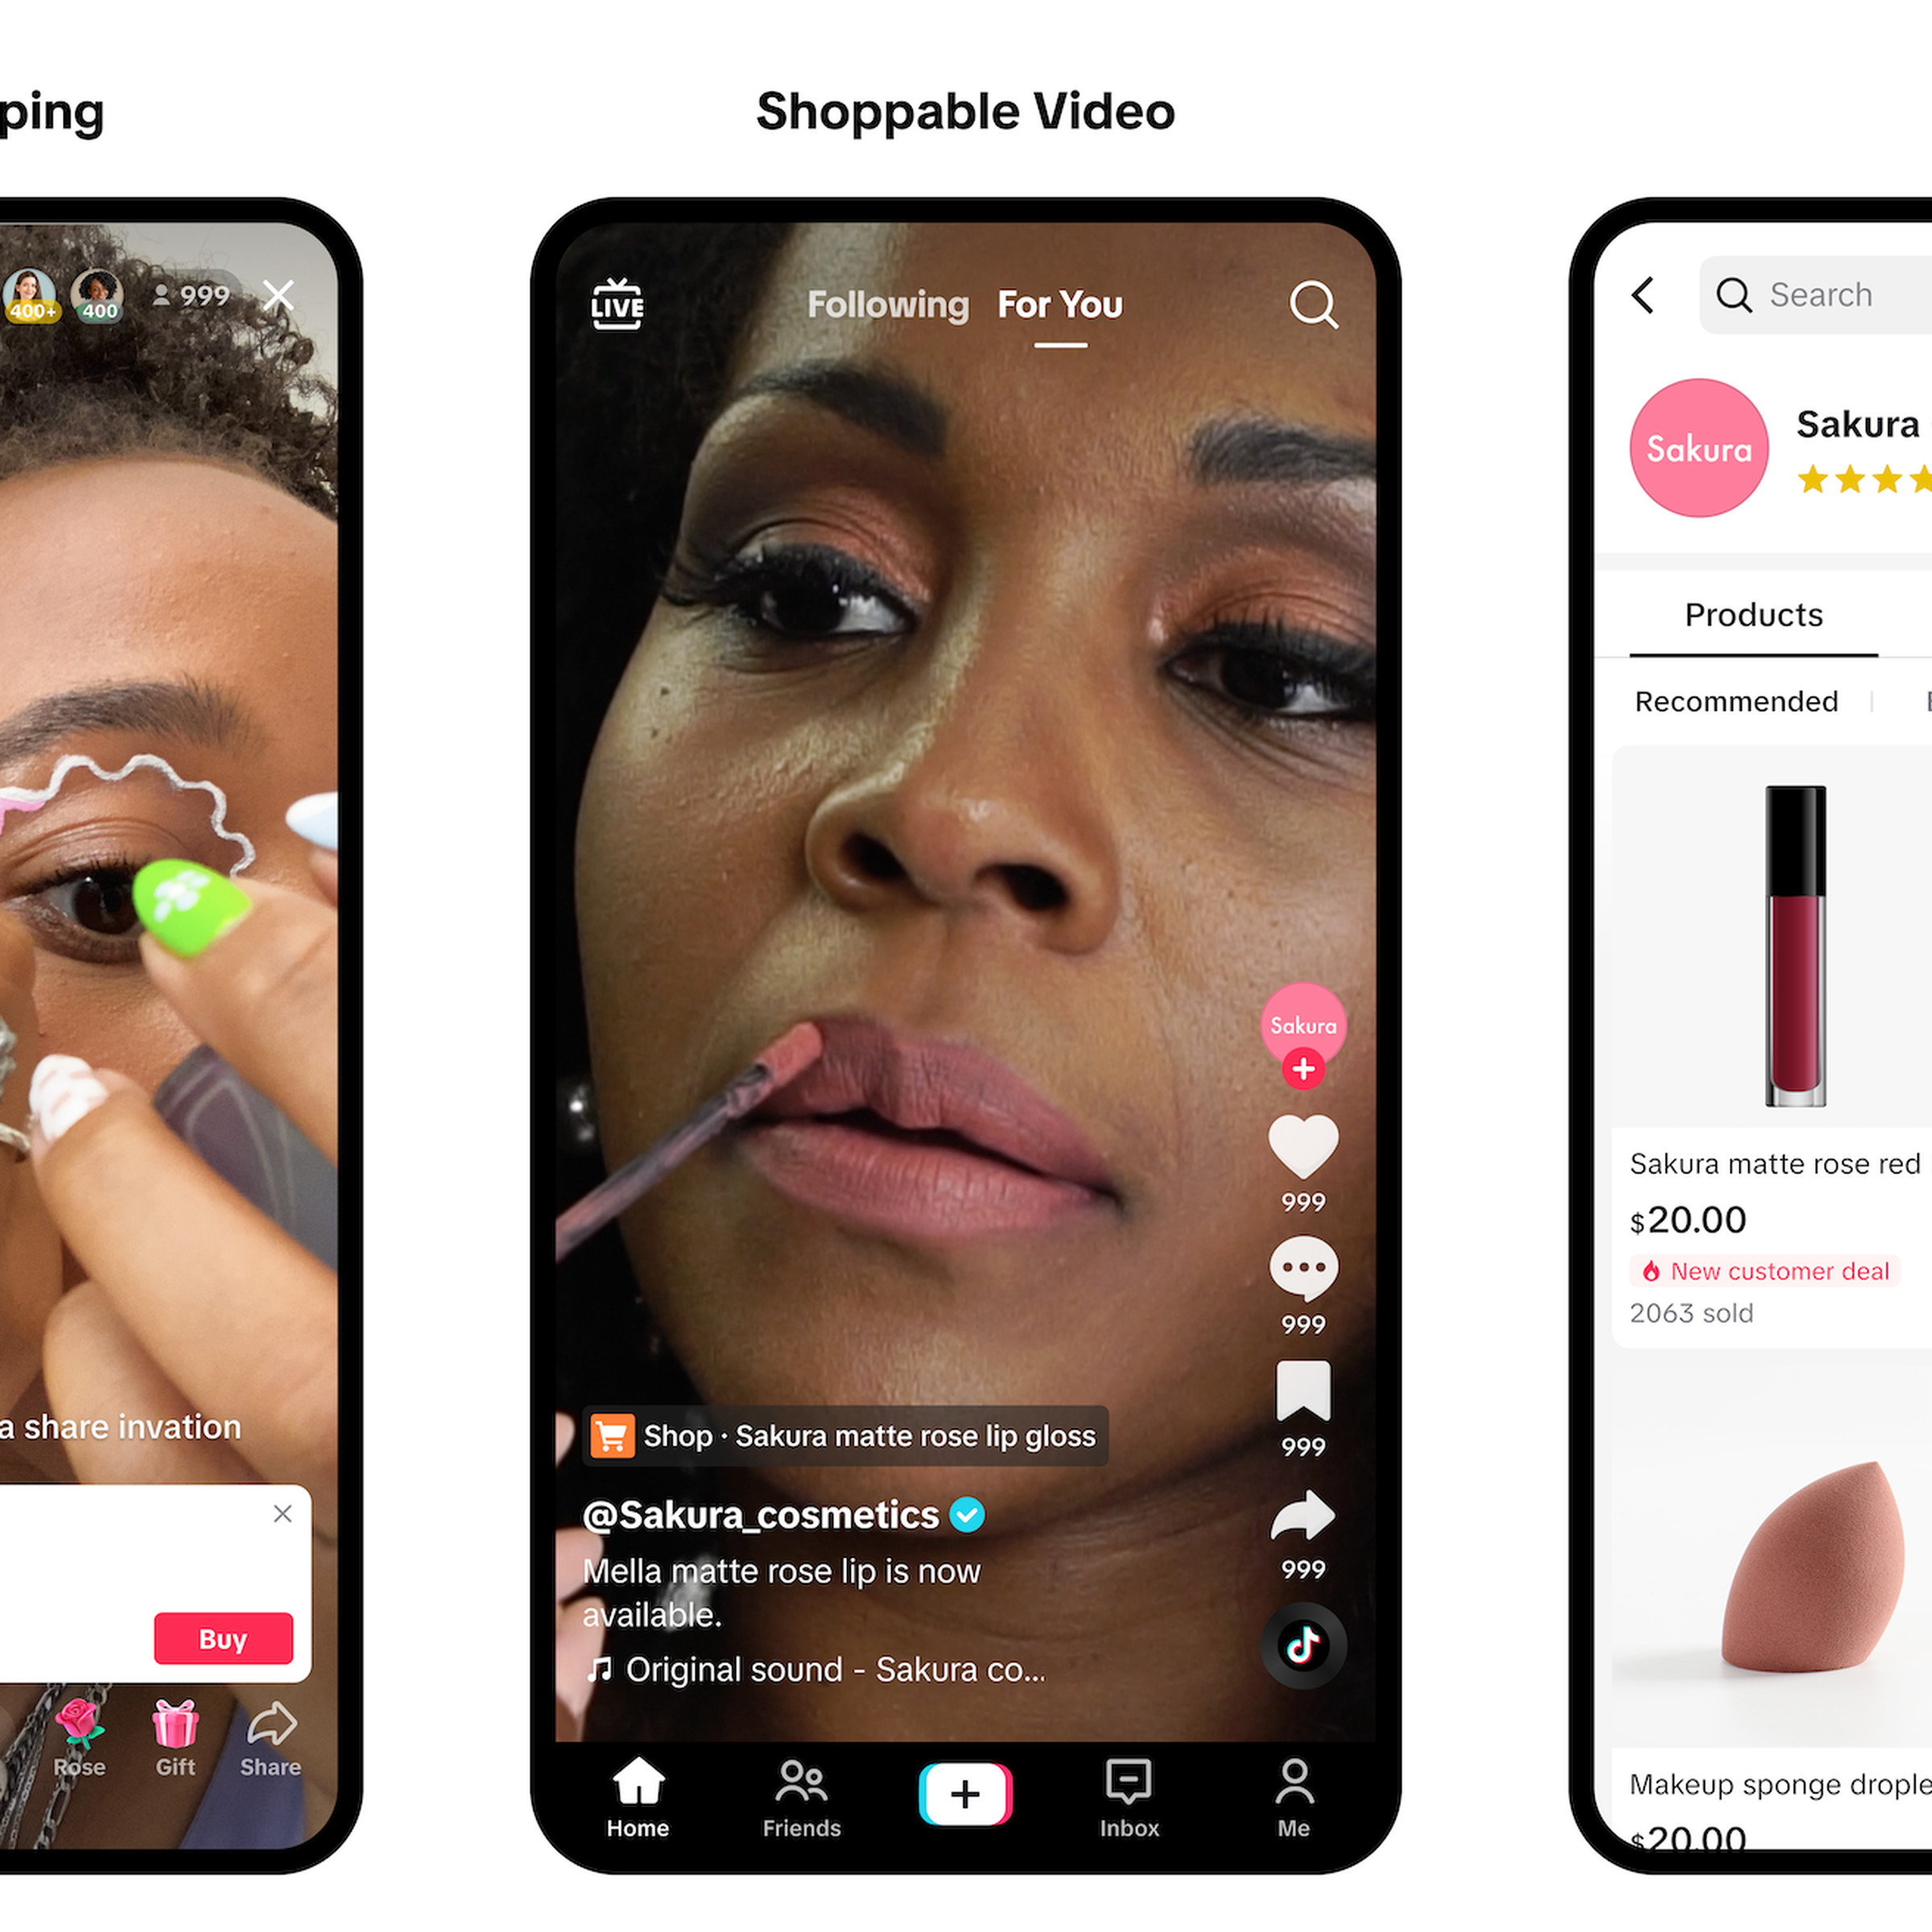 Three screens showing some of what shopping on TikTok on your phone will look like.